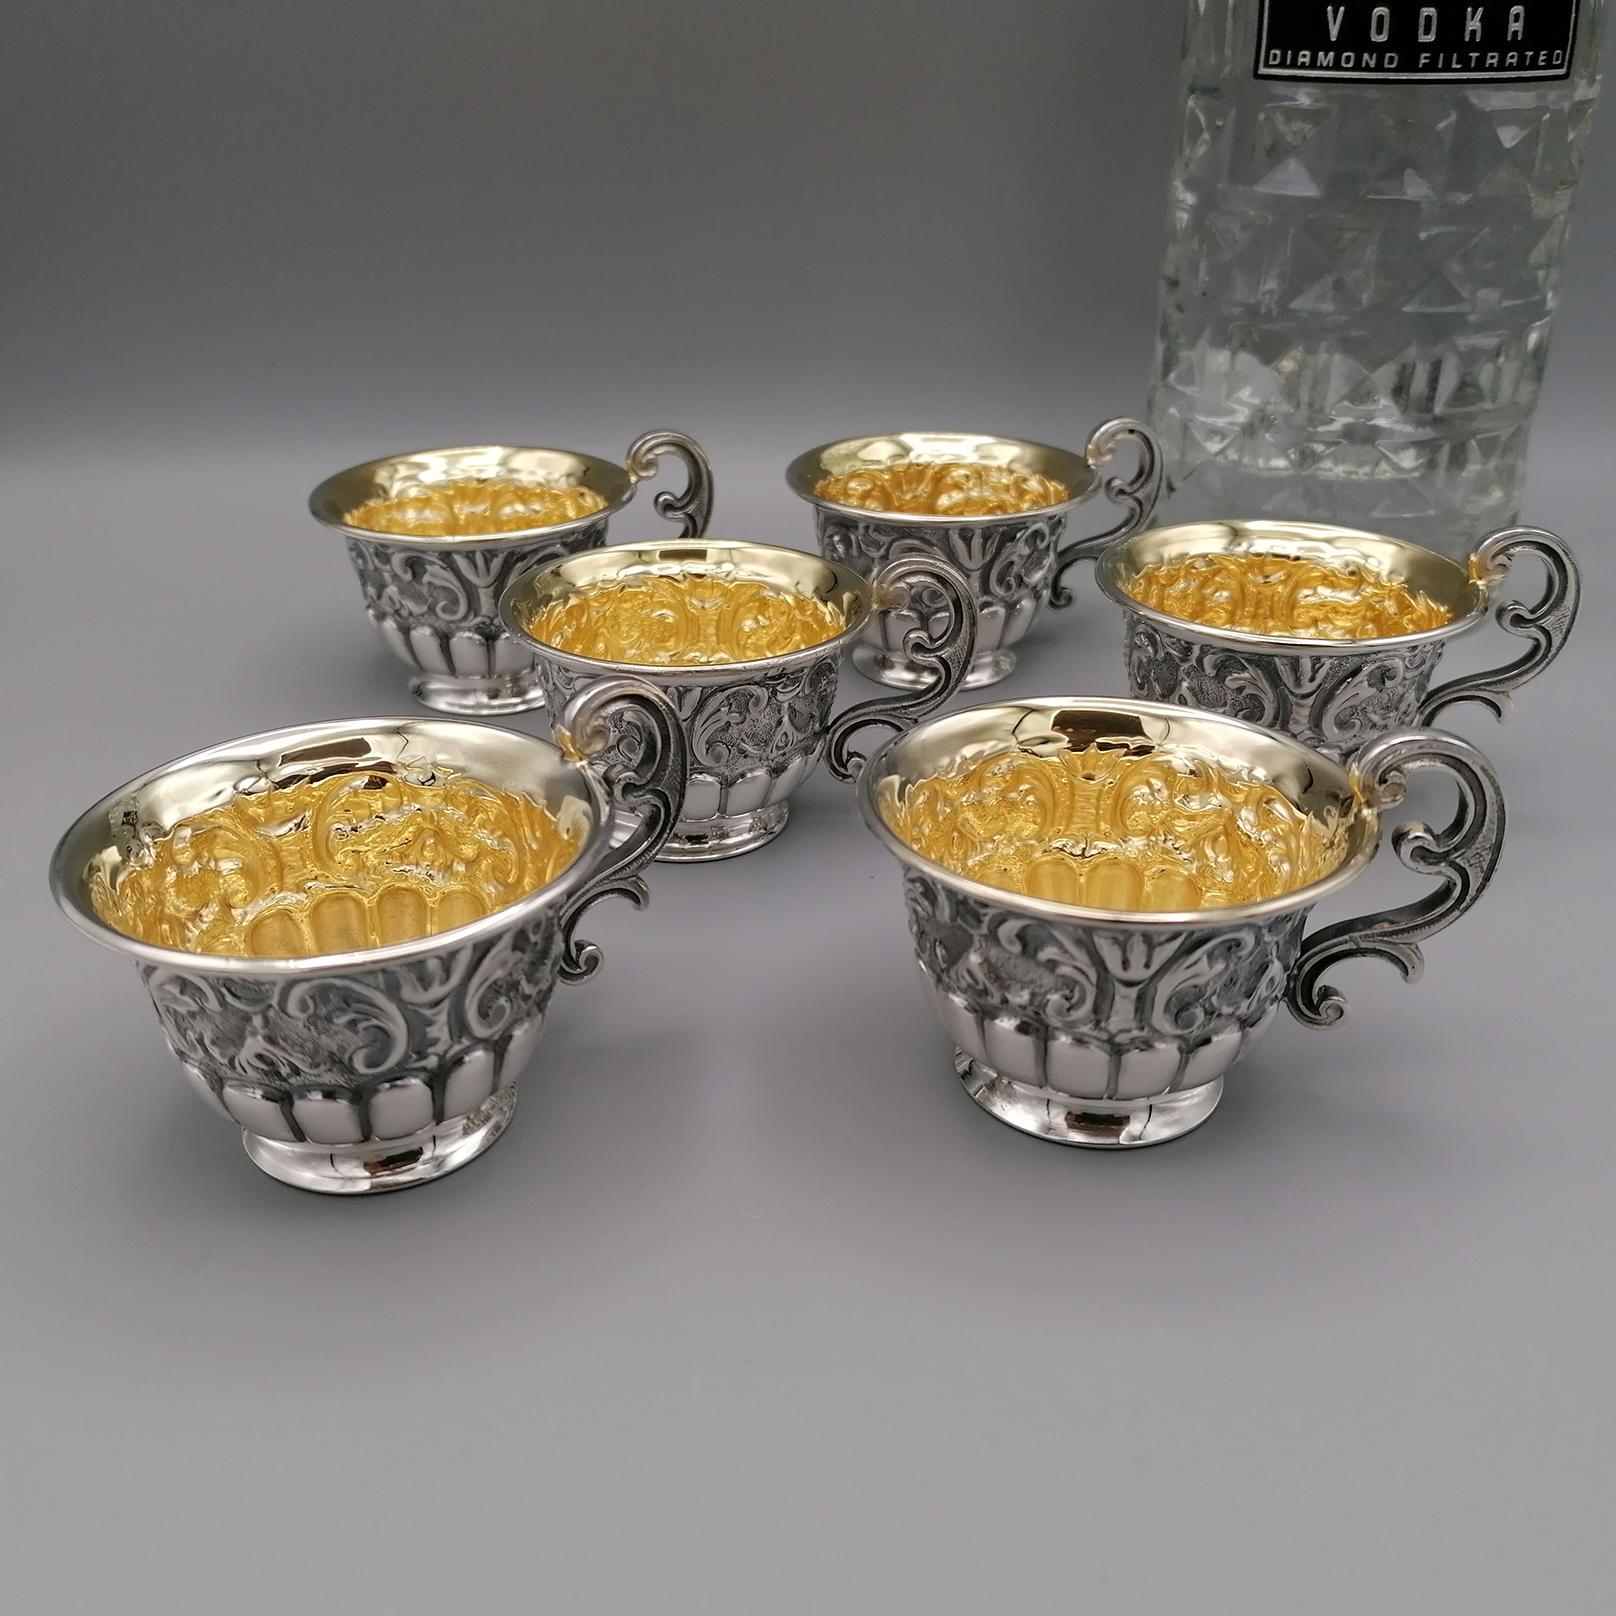 20th century Italian solid 800 silver set of 6 vodka beakers, 
copy of Russian vodka beakers made in Moscow at the end of 1600.
The originals are in the Baldwin collection in London.
The Baldwin collection is arguably the largest collection of